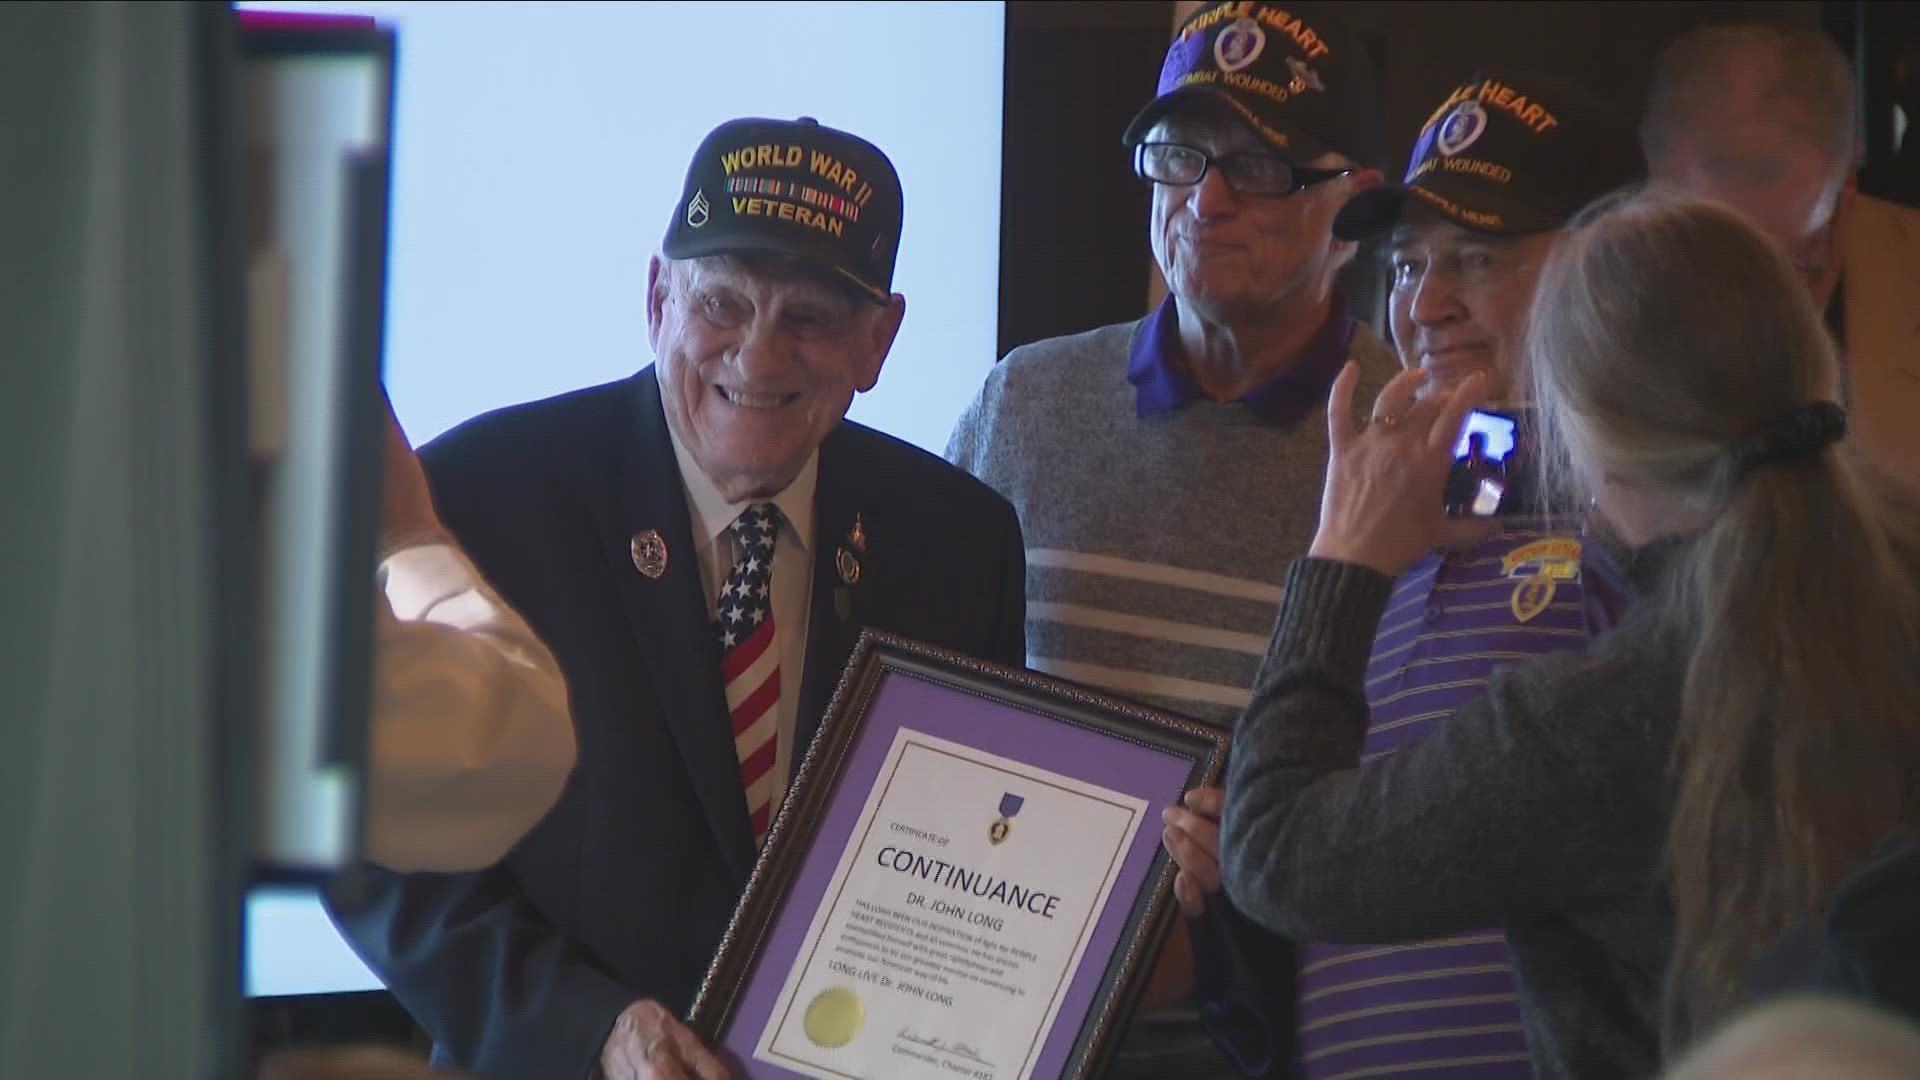 The 96th birthday of World War II veteran Dr. John B. Long was Wednesday. He spent some of the day at Buffalo and Erie County Naval and Military Park.